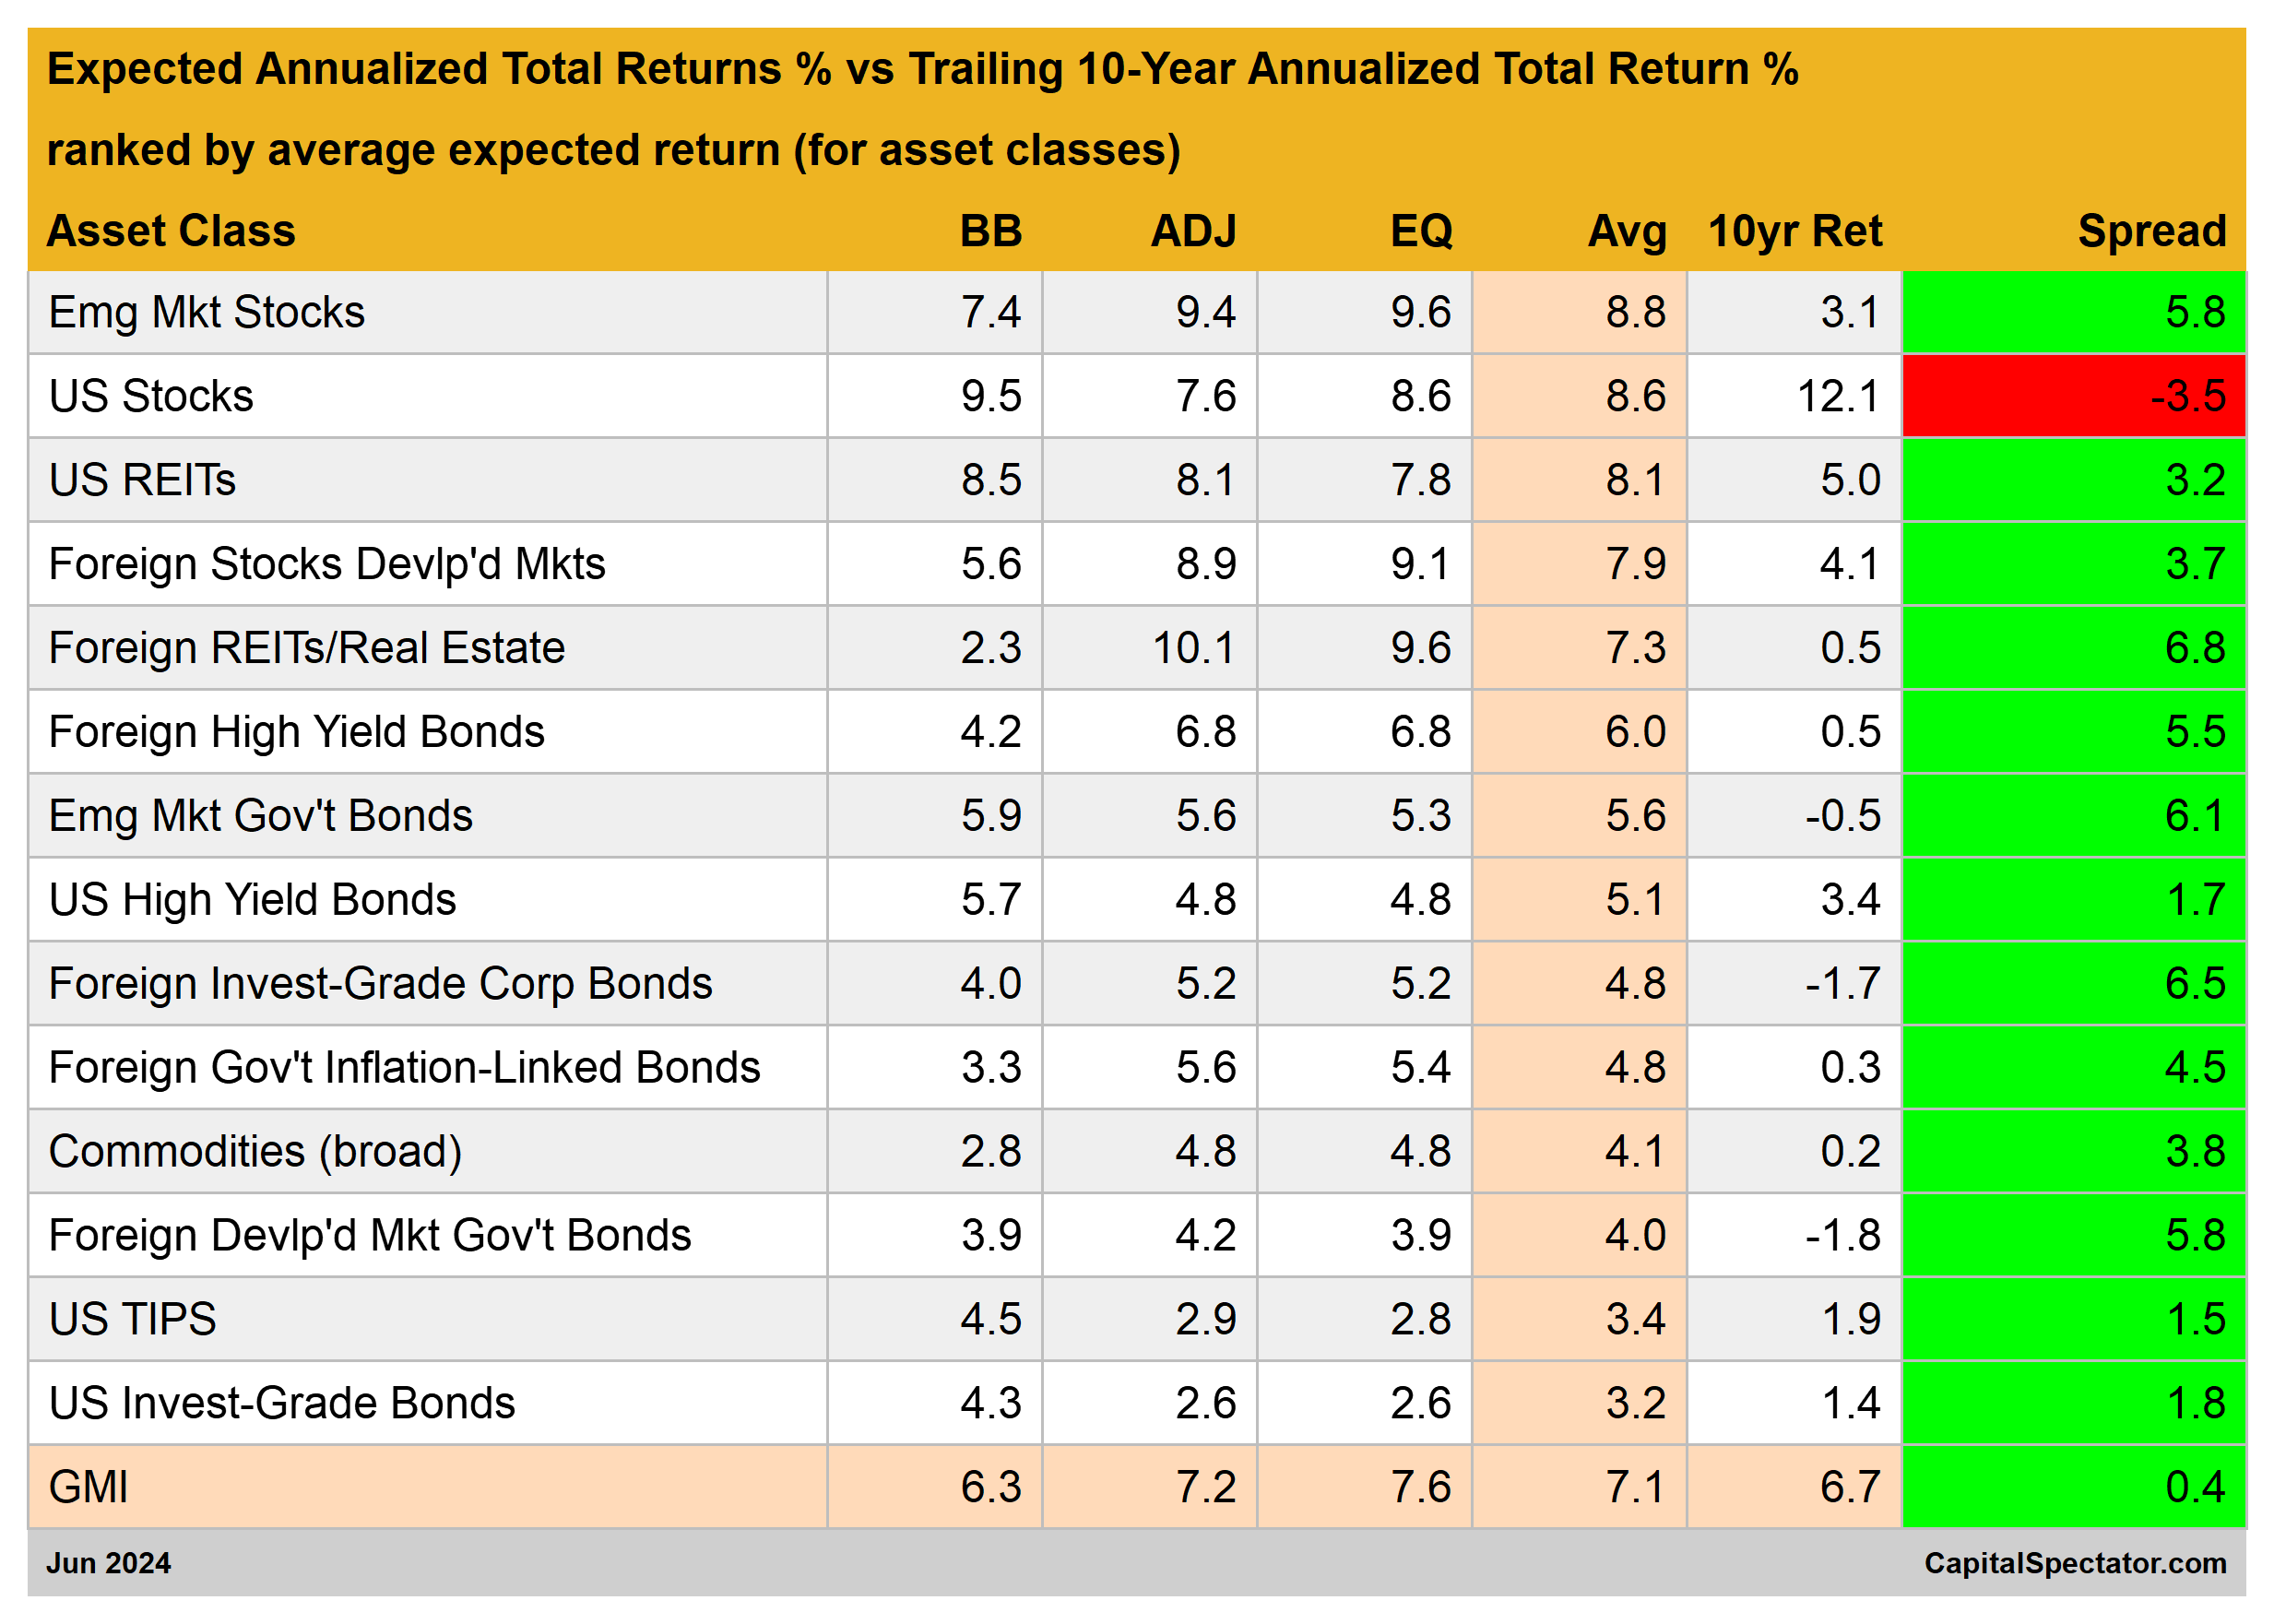 Expected vs Trailing Annualized Total Returns